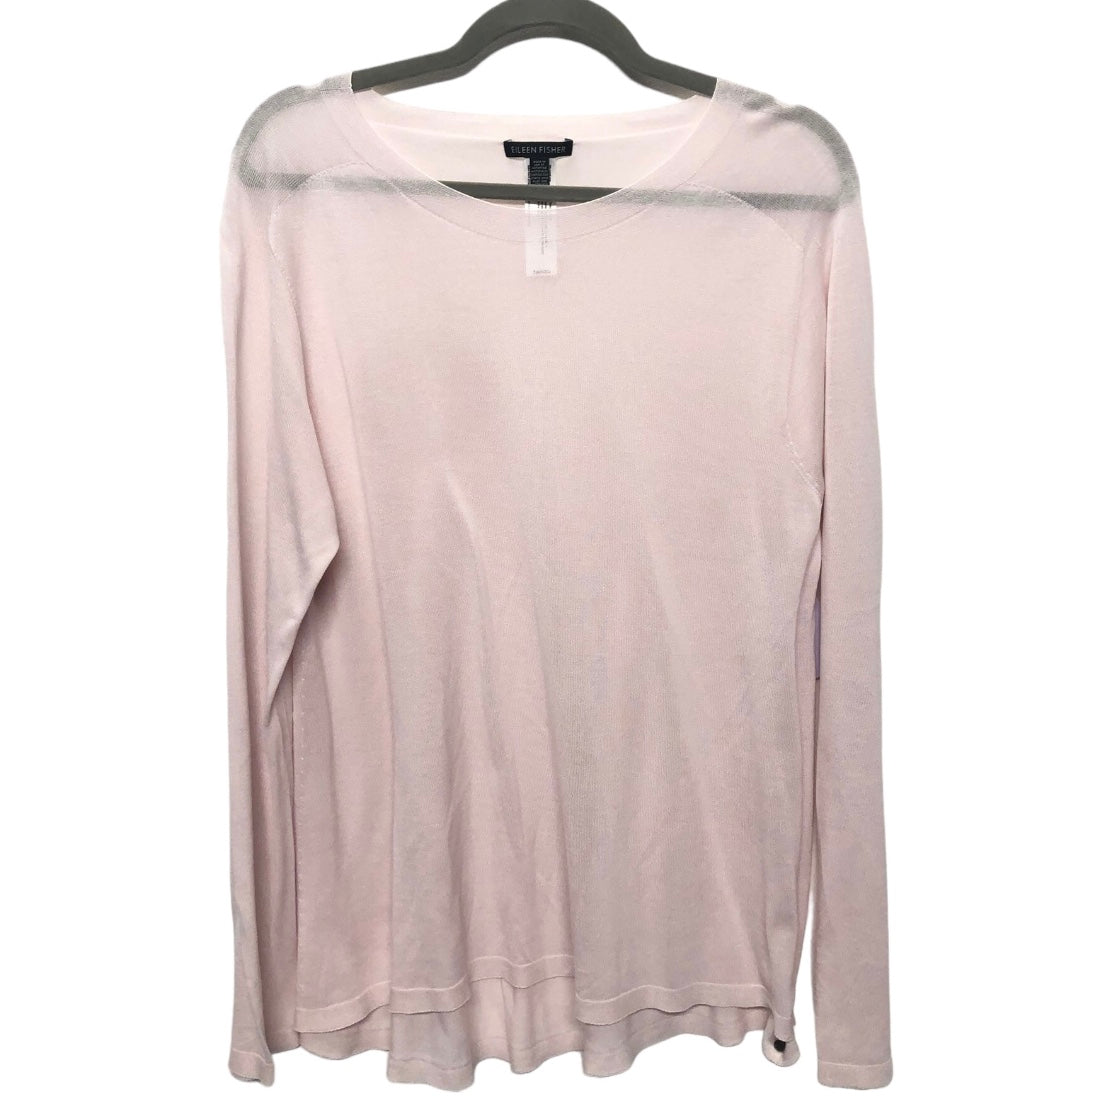 Pink Top Long Sleeve Eileen Fisher, Size L